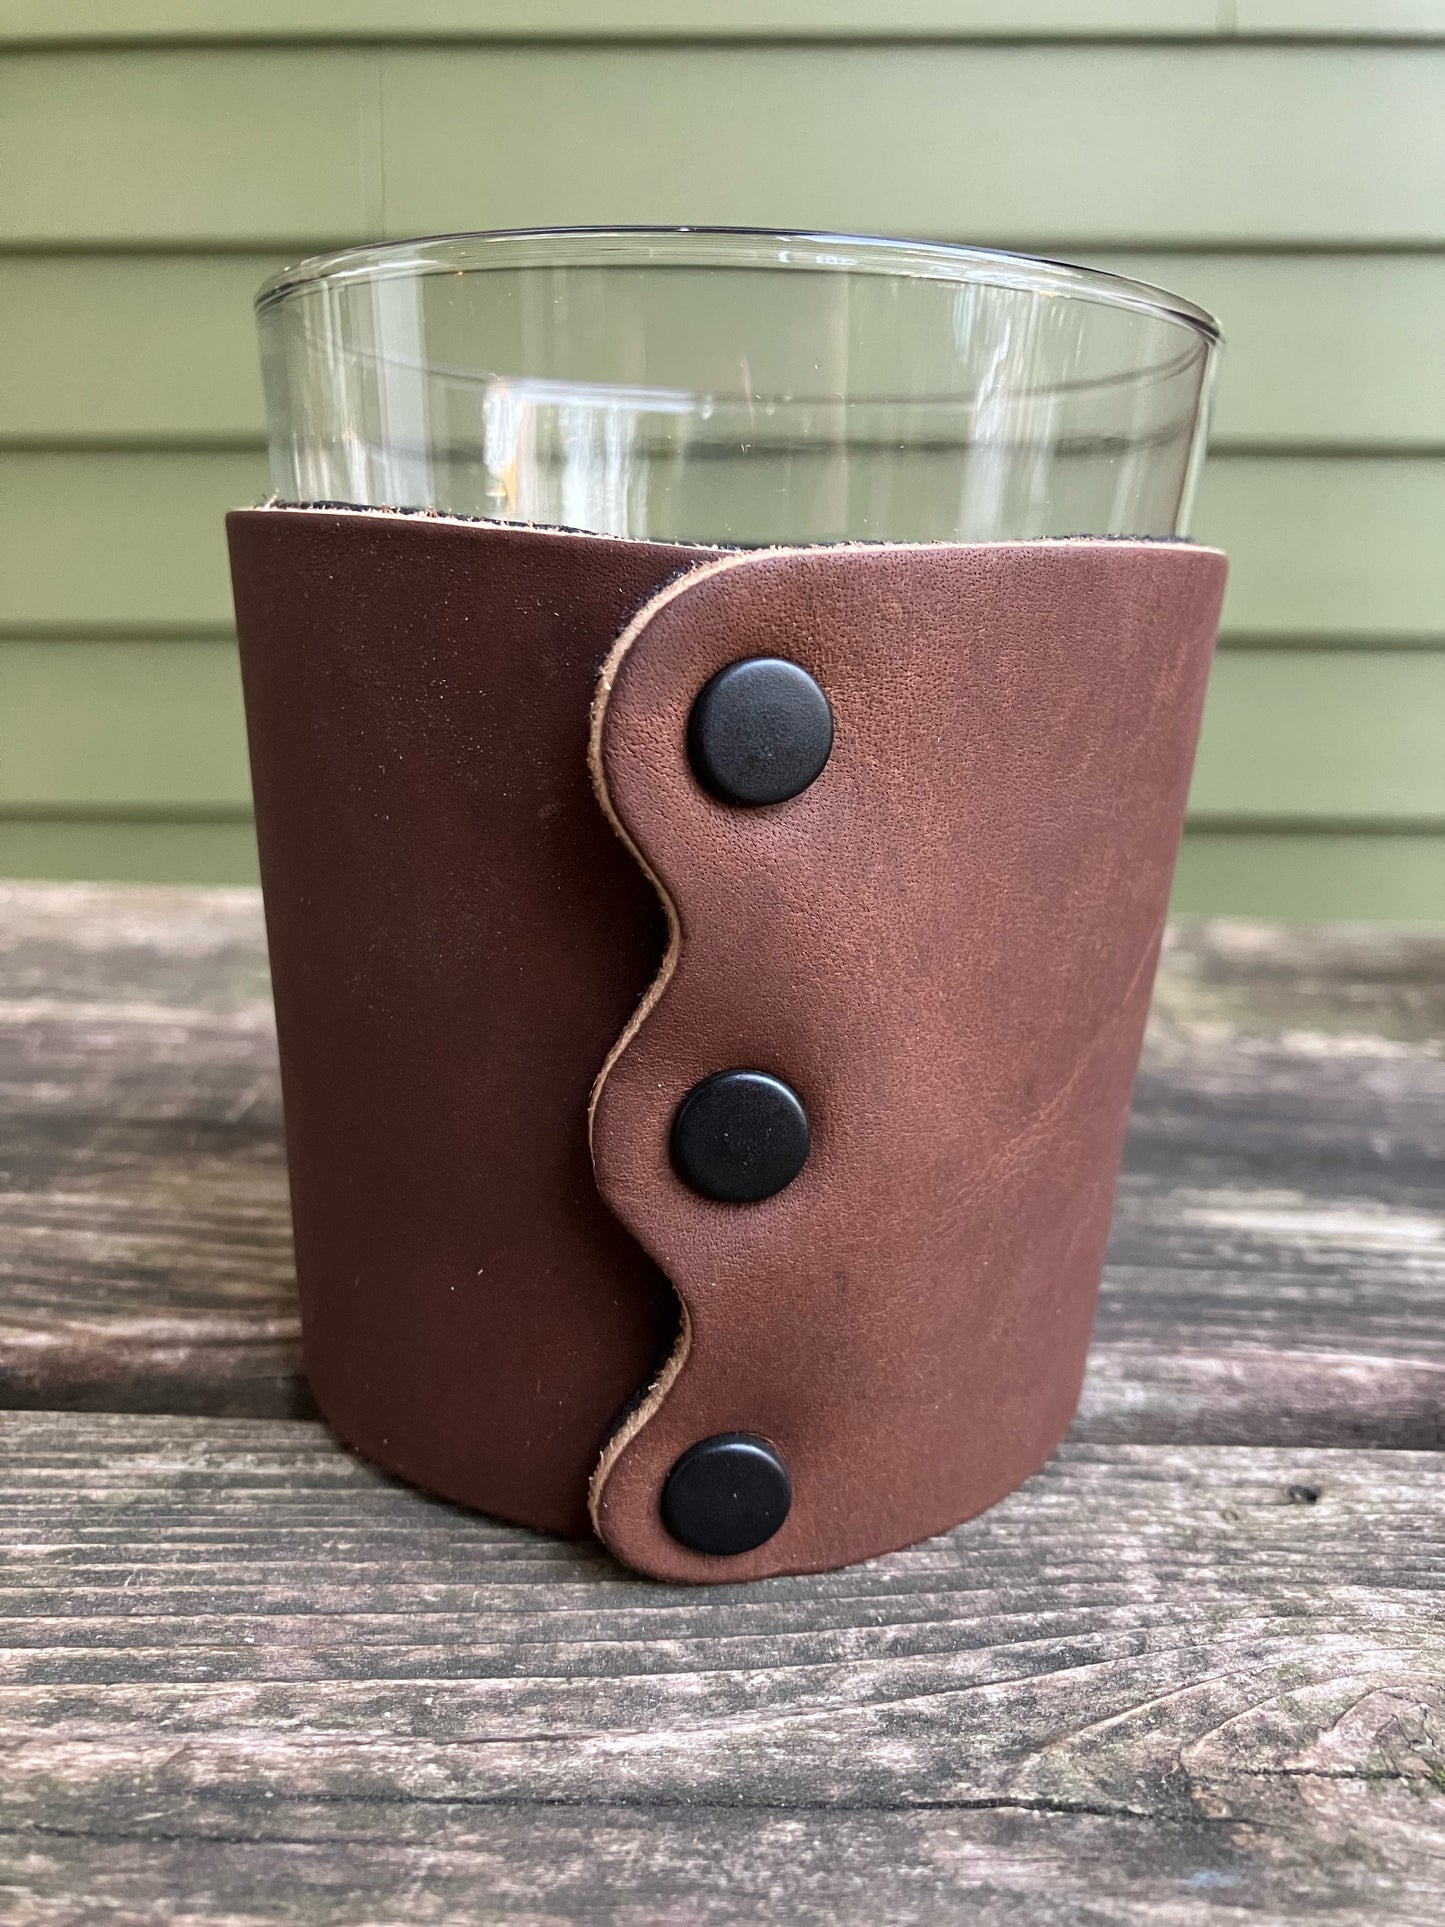 Leather Wrapped Whiskey Glass - Woof